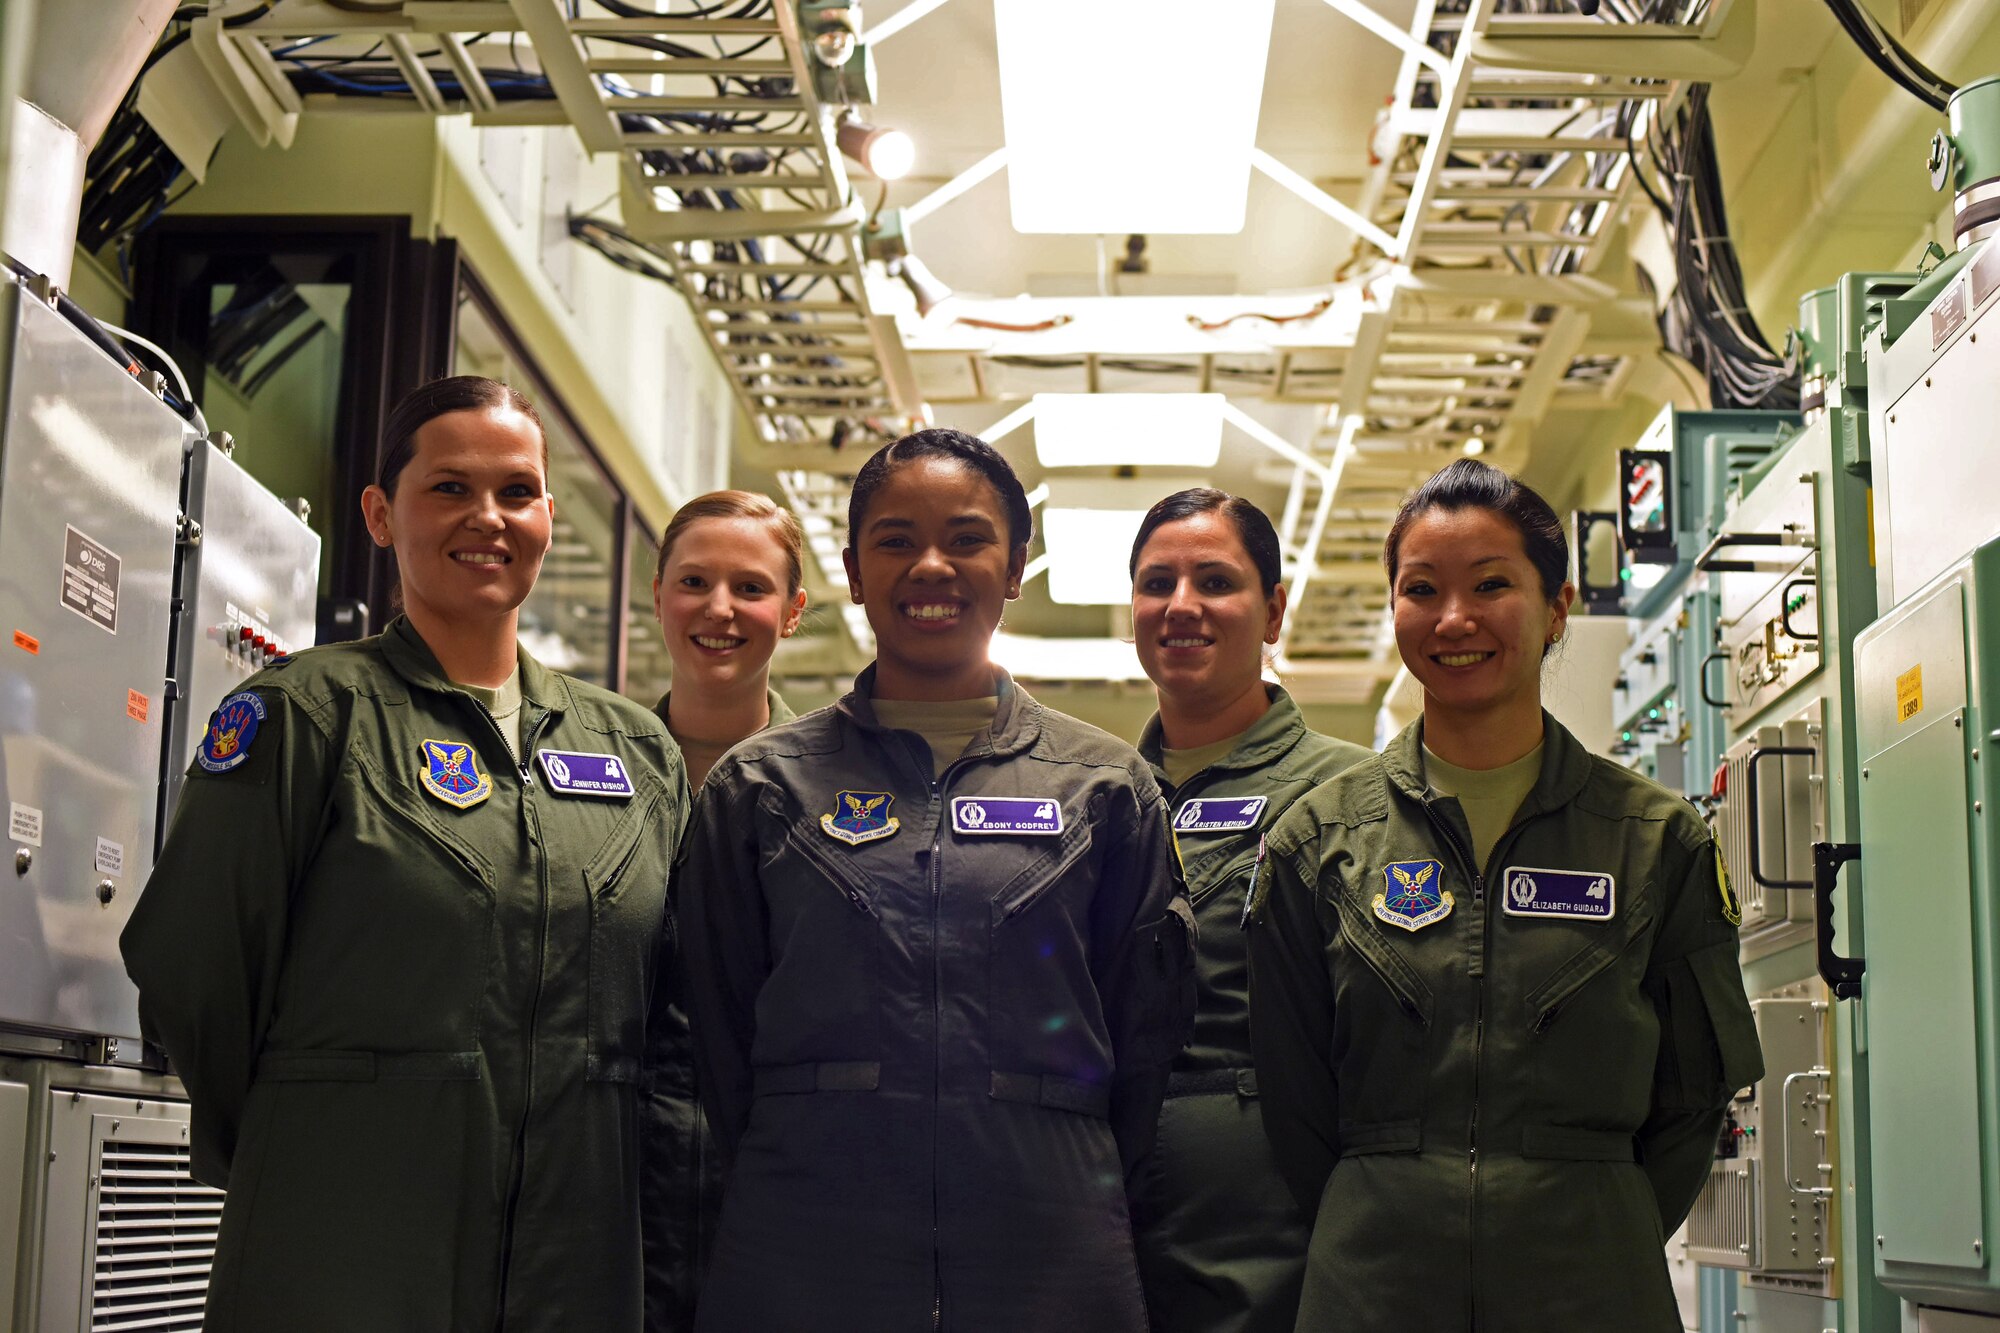 Missileers from Malmstrom Air Force Base, Mont., pose for a photograph after a training session at the missile procedures trainer March 21, 2016. Missile officers perform extensive training to ensure their ability to maintain quick response time and accurate input of essential data. (U.S. Air Force photo/Airman Collin Schmidt)